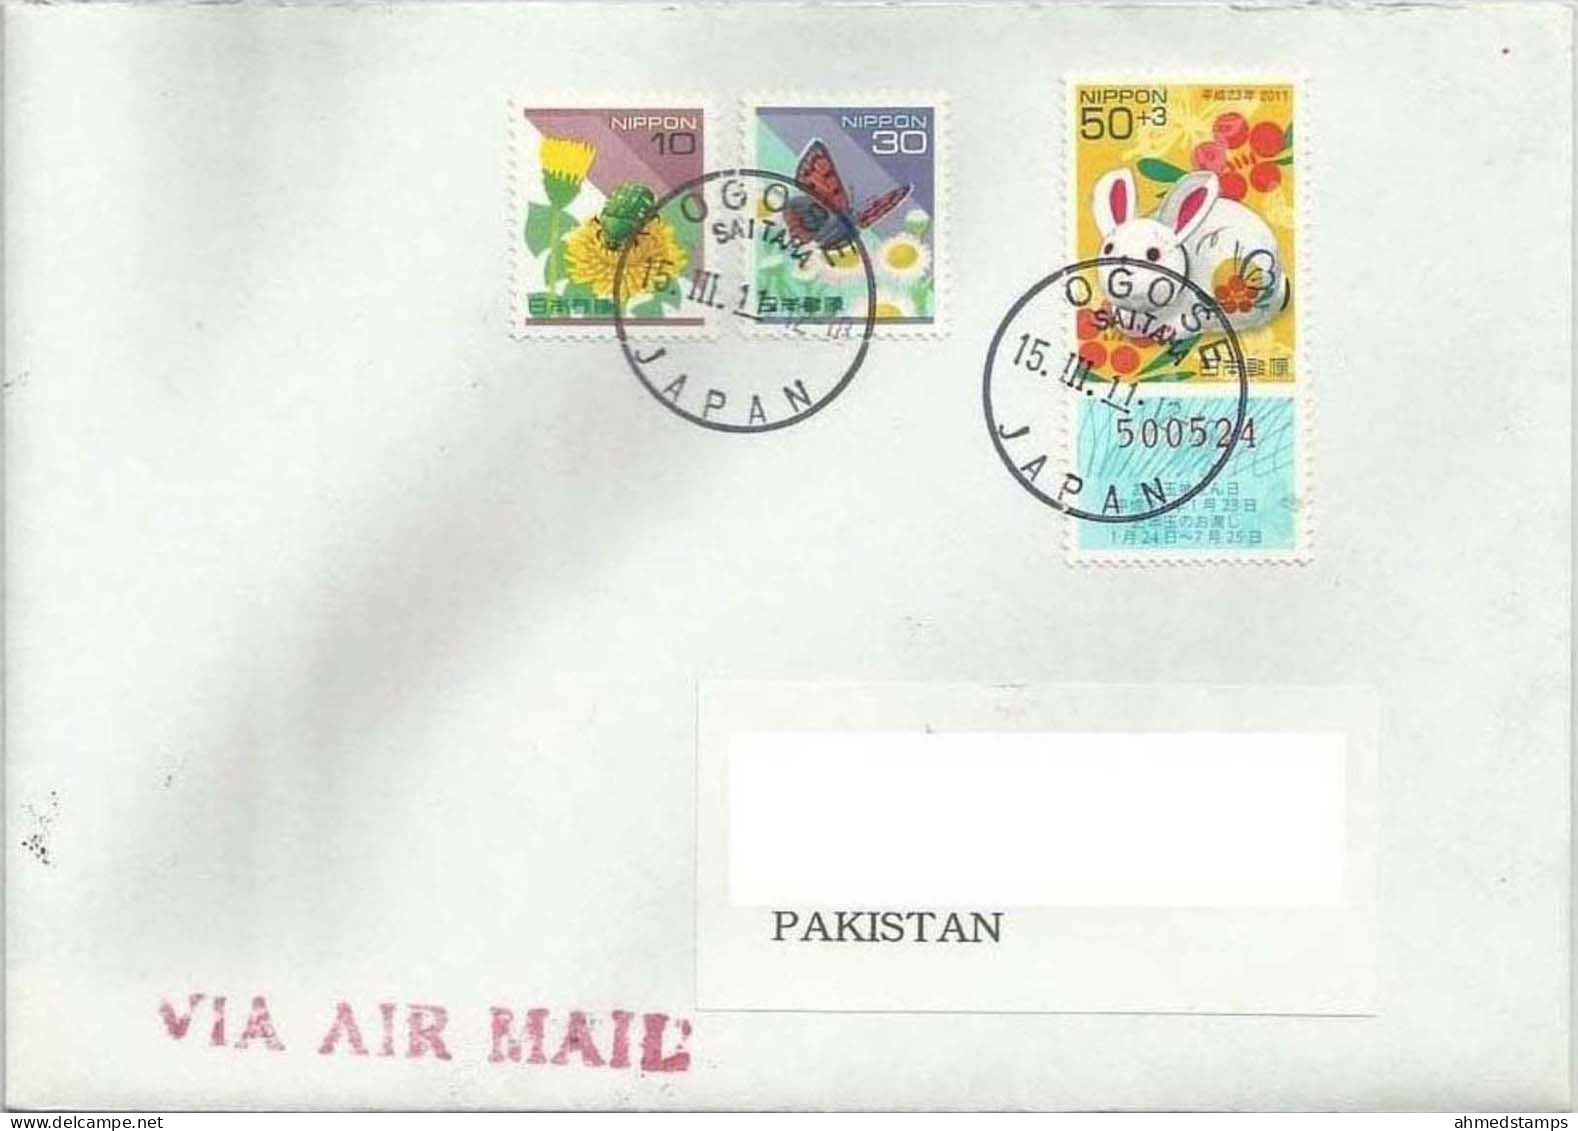 JAPAN POSTAL USED COVER AIRMAIL TO PAKISTAN BUTTERFLY FLOWERS RABBIT ANIMAL ANIMALS - Airmail